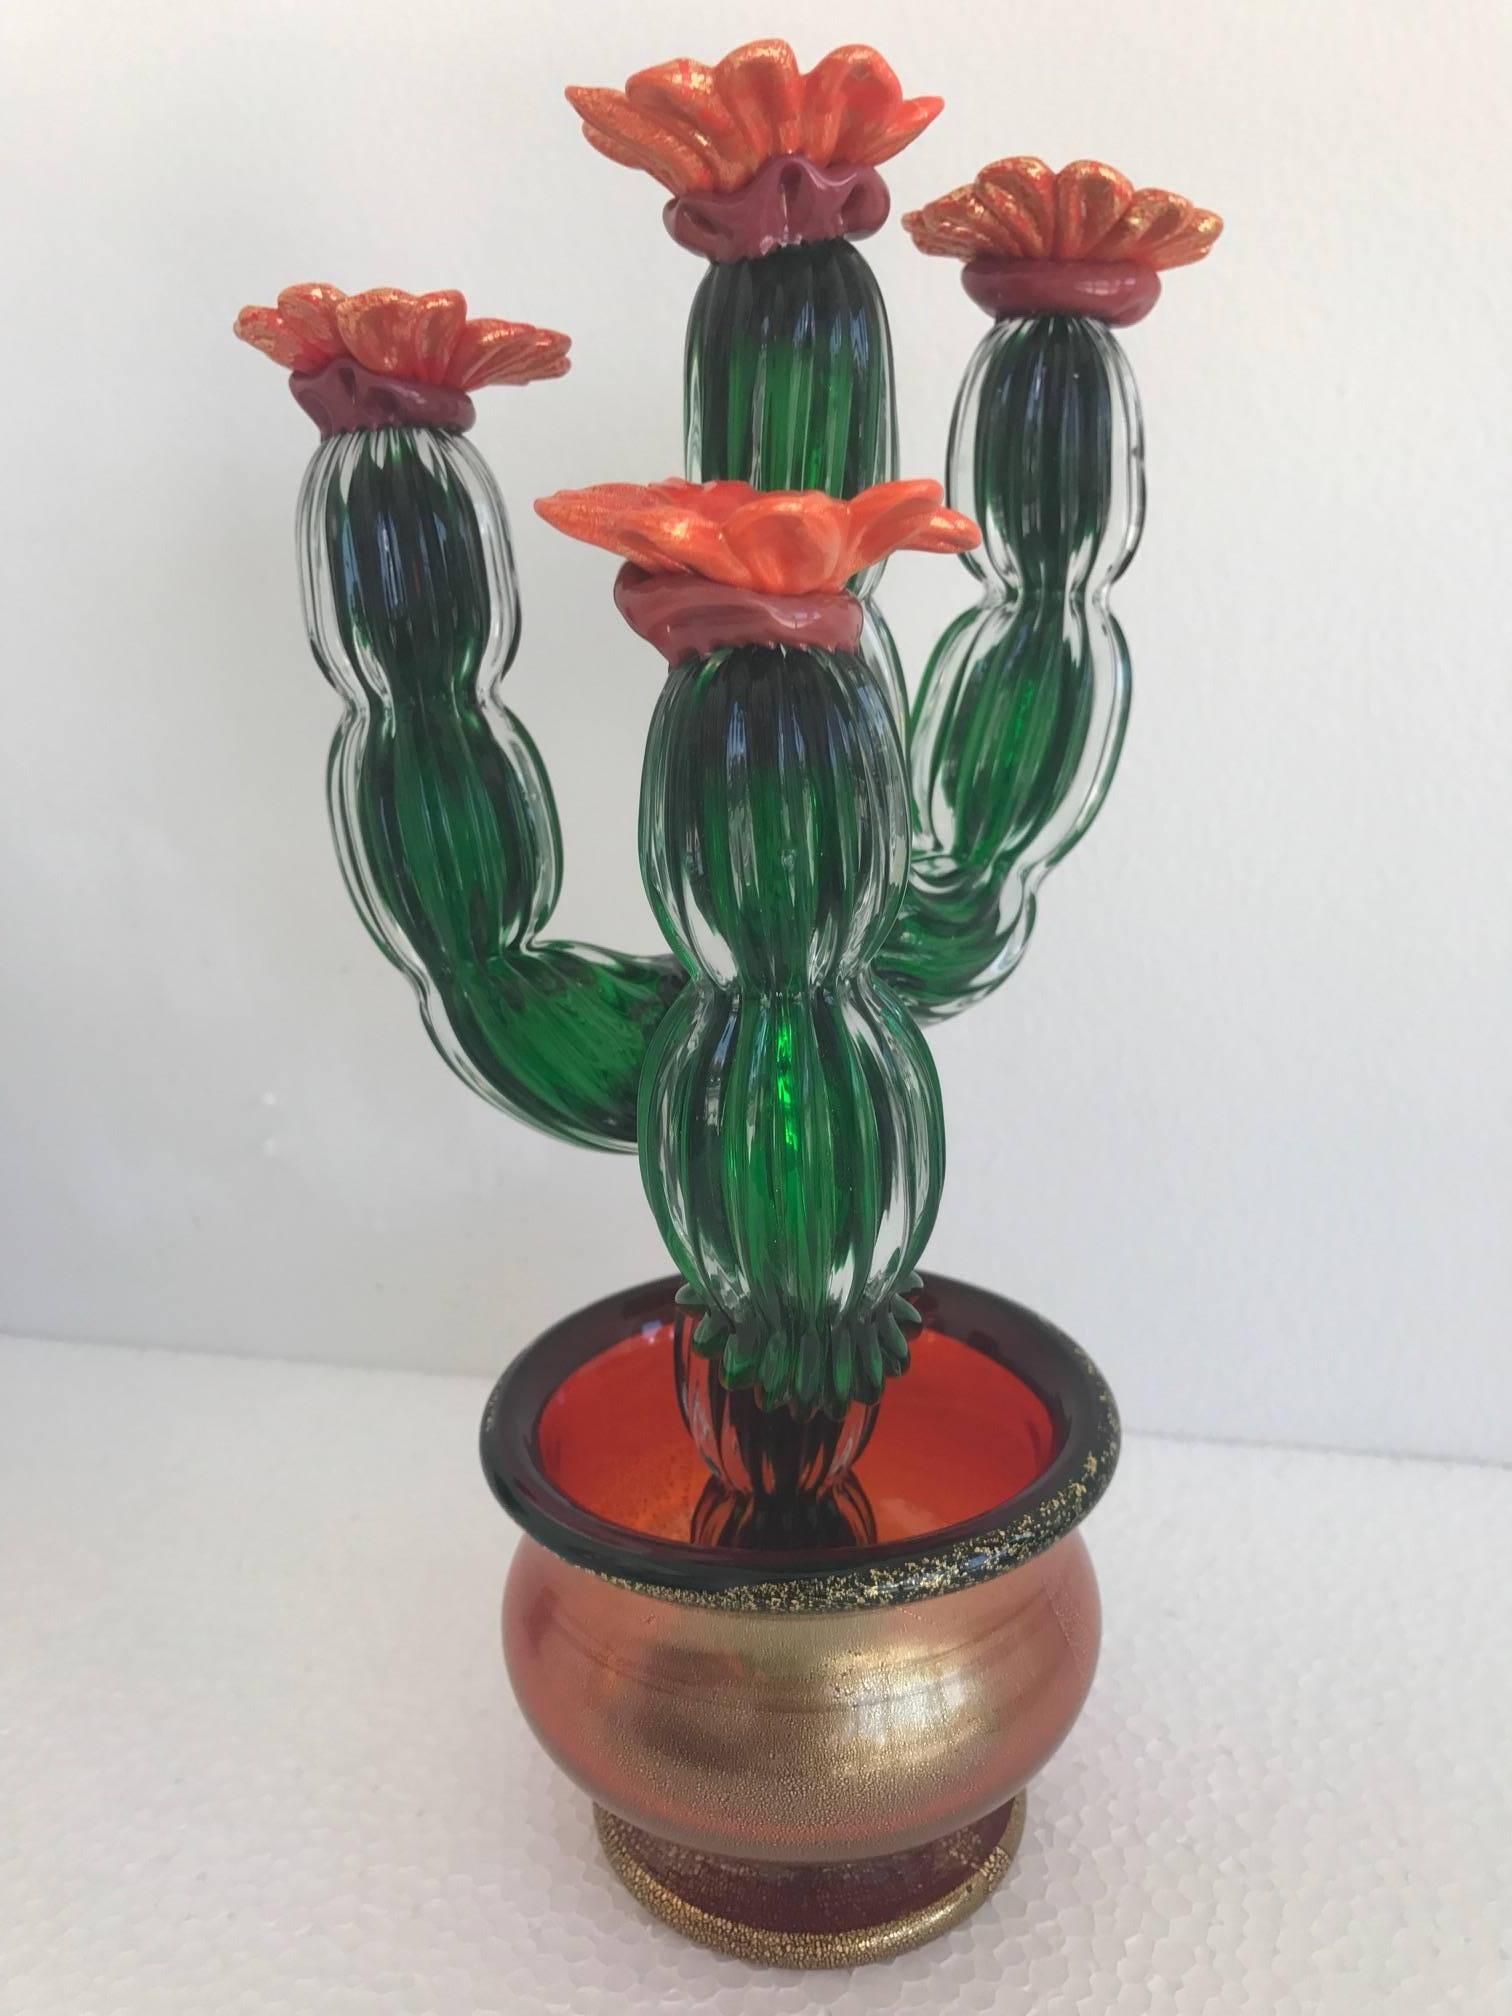 Two (almost a pair) exceptional 1980s Murano blown green and red glass cacti in pots. Please see our listings for more cacti to add or start your own collection.
For additional questions regarding this item, please click the "Contact